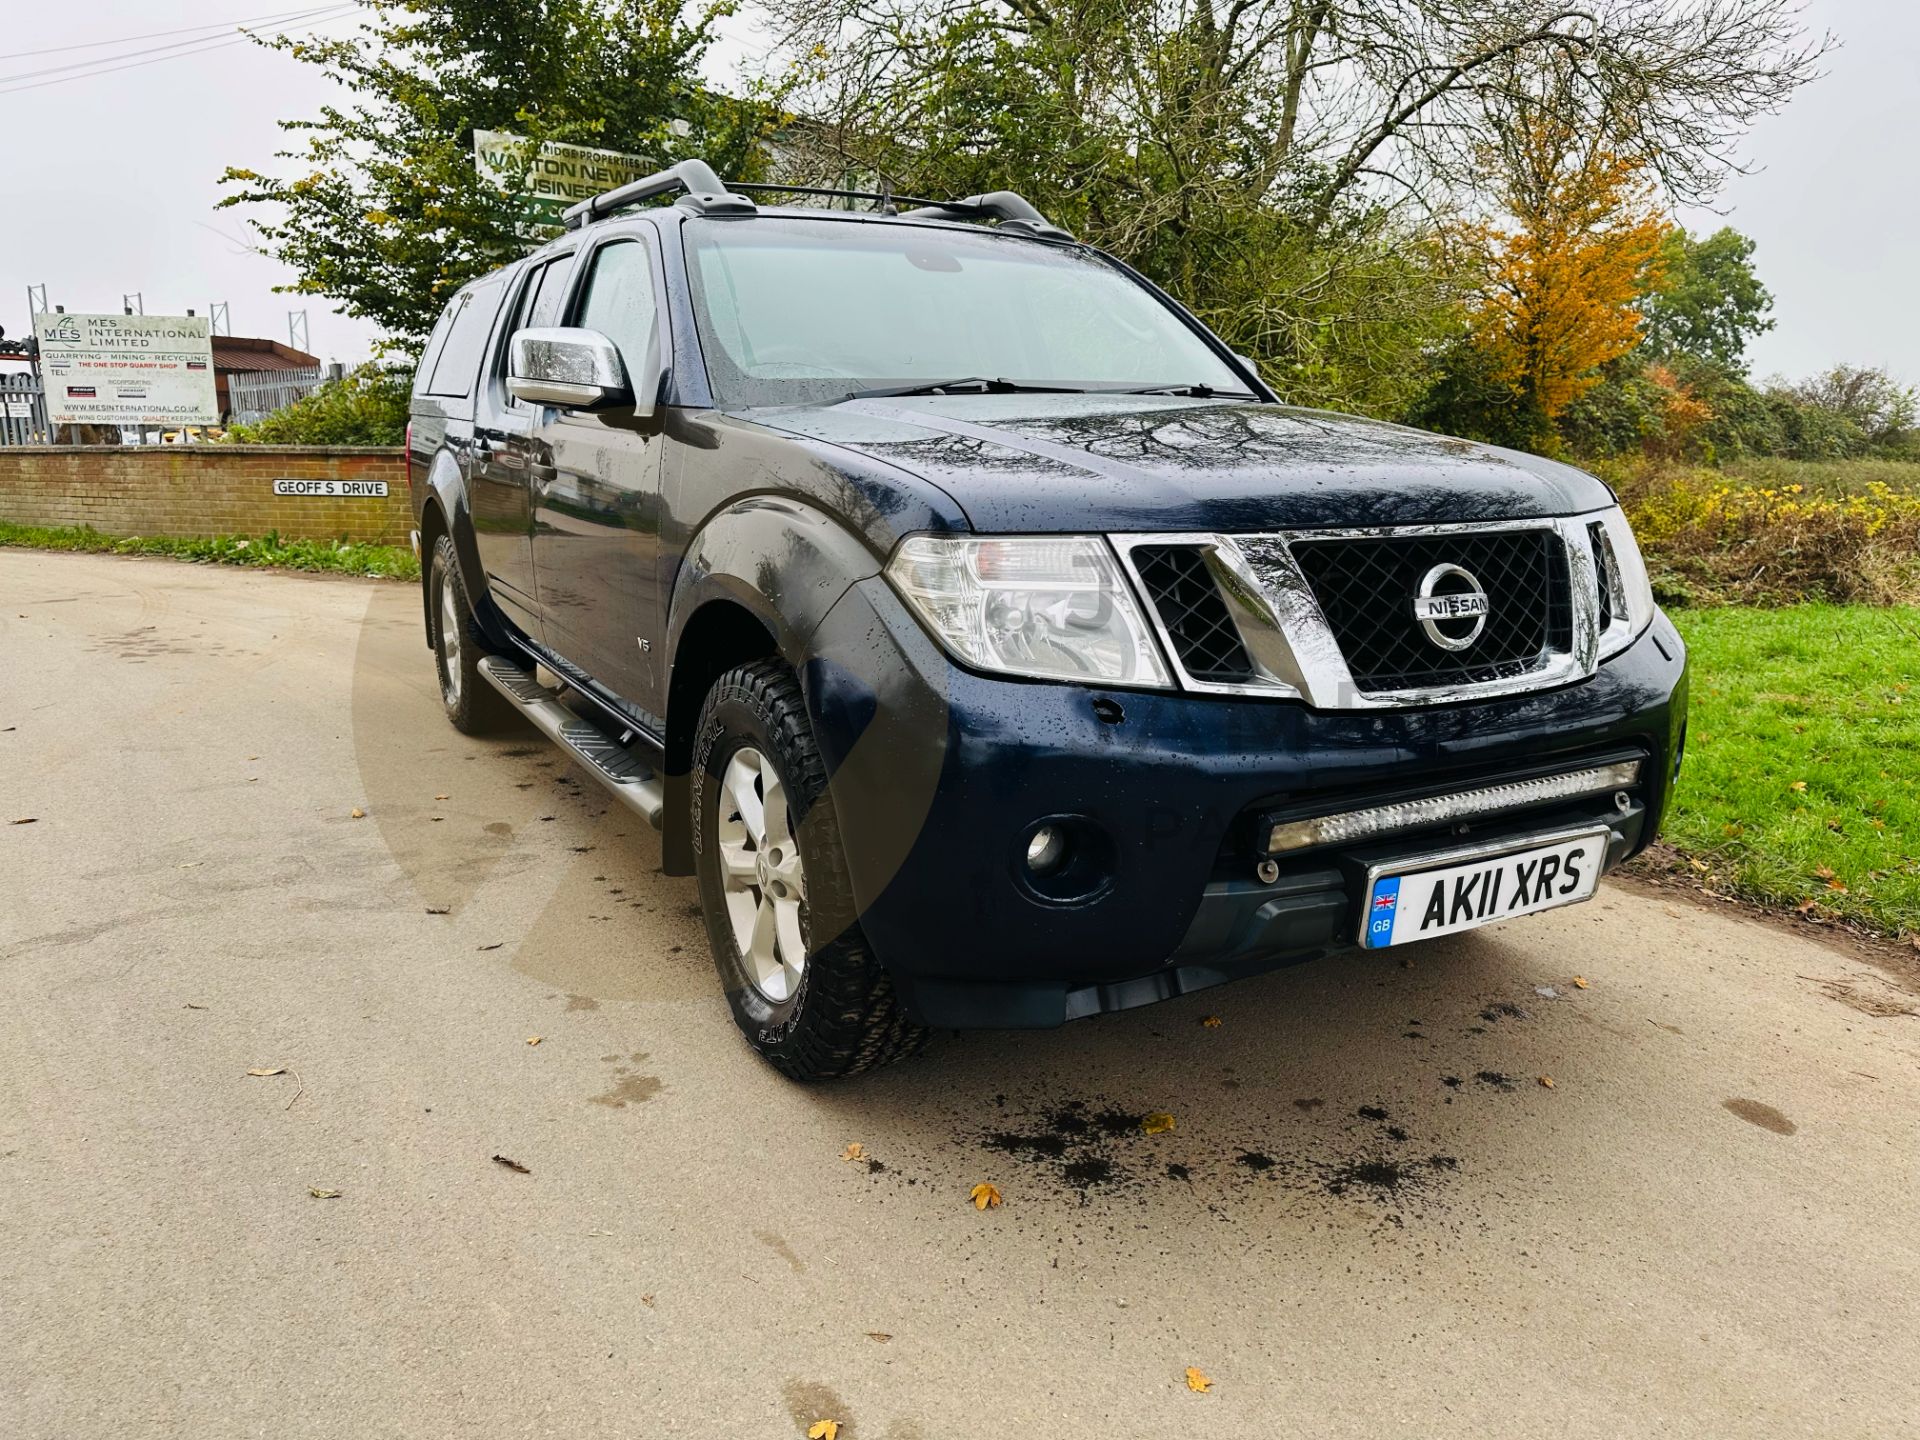 (ON SALE)NISSAN NAVARA *OUTLAW EDITION* 3.0 V6 TURBO DIESEL AUTOMATIC DOUBLE CAB PICKUP - 11 REG - Image 3 of 43